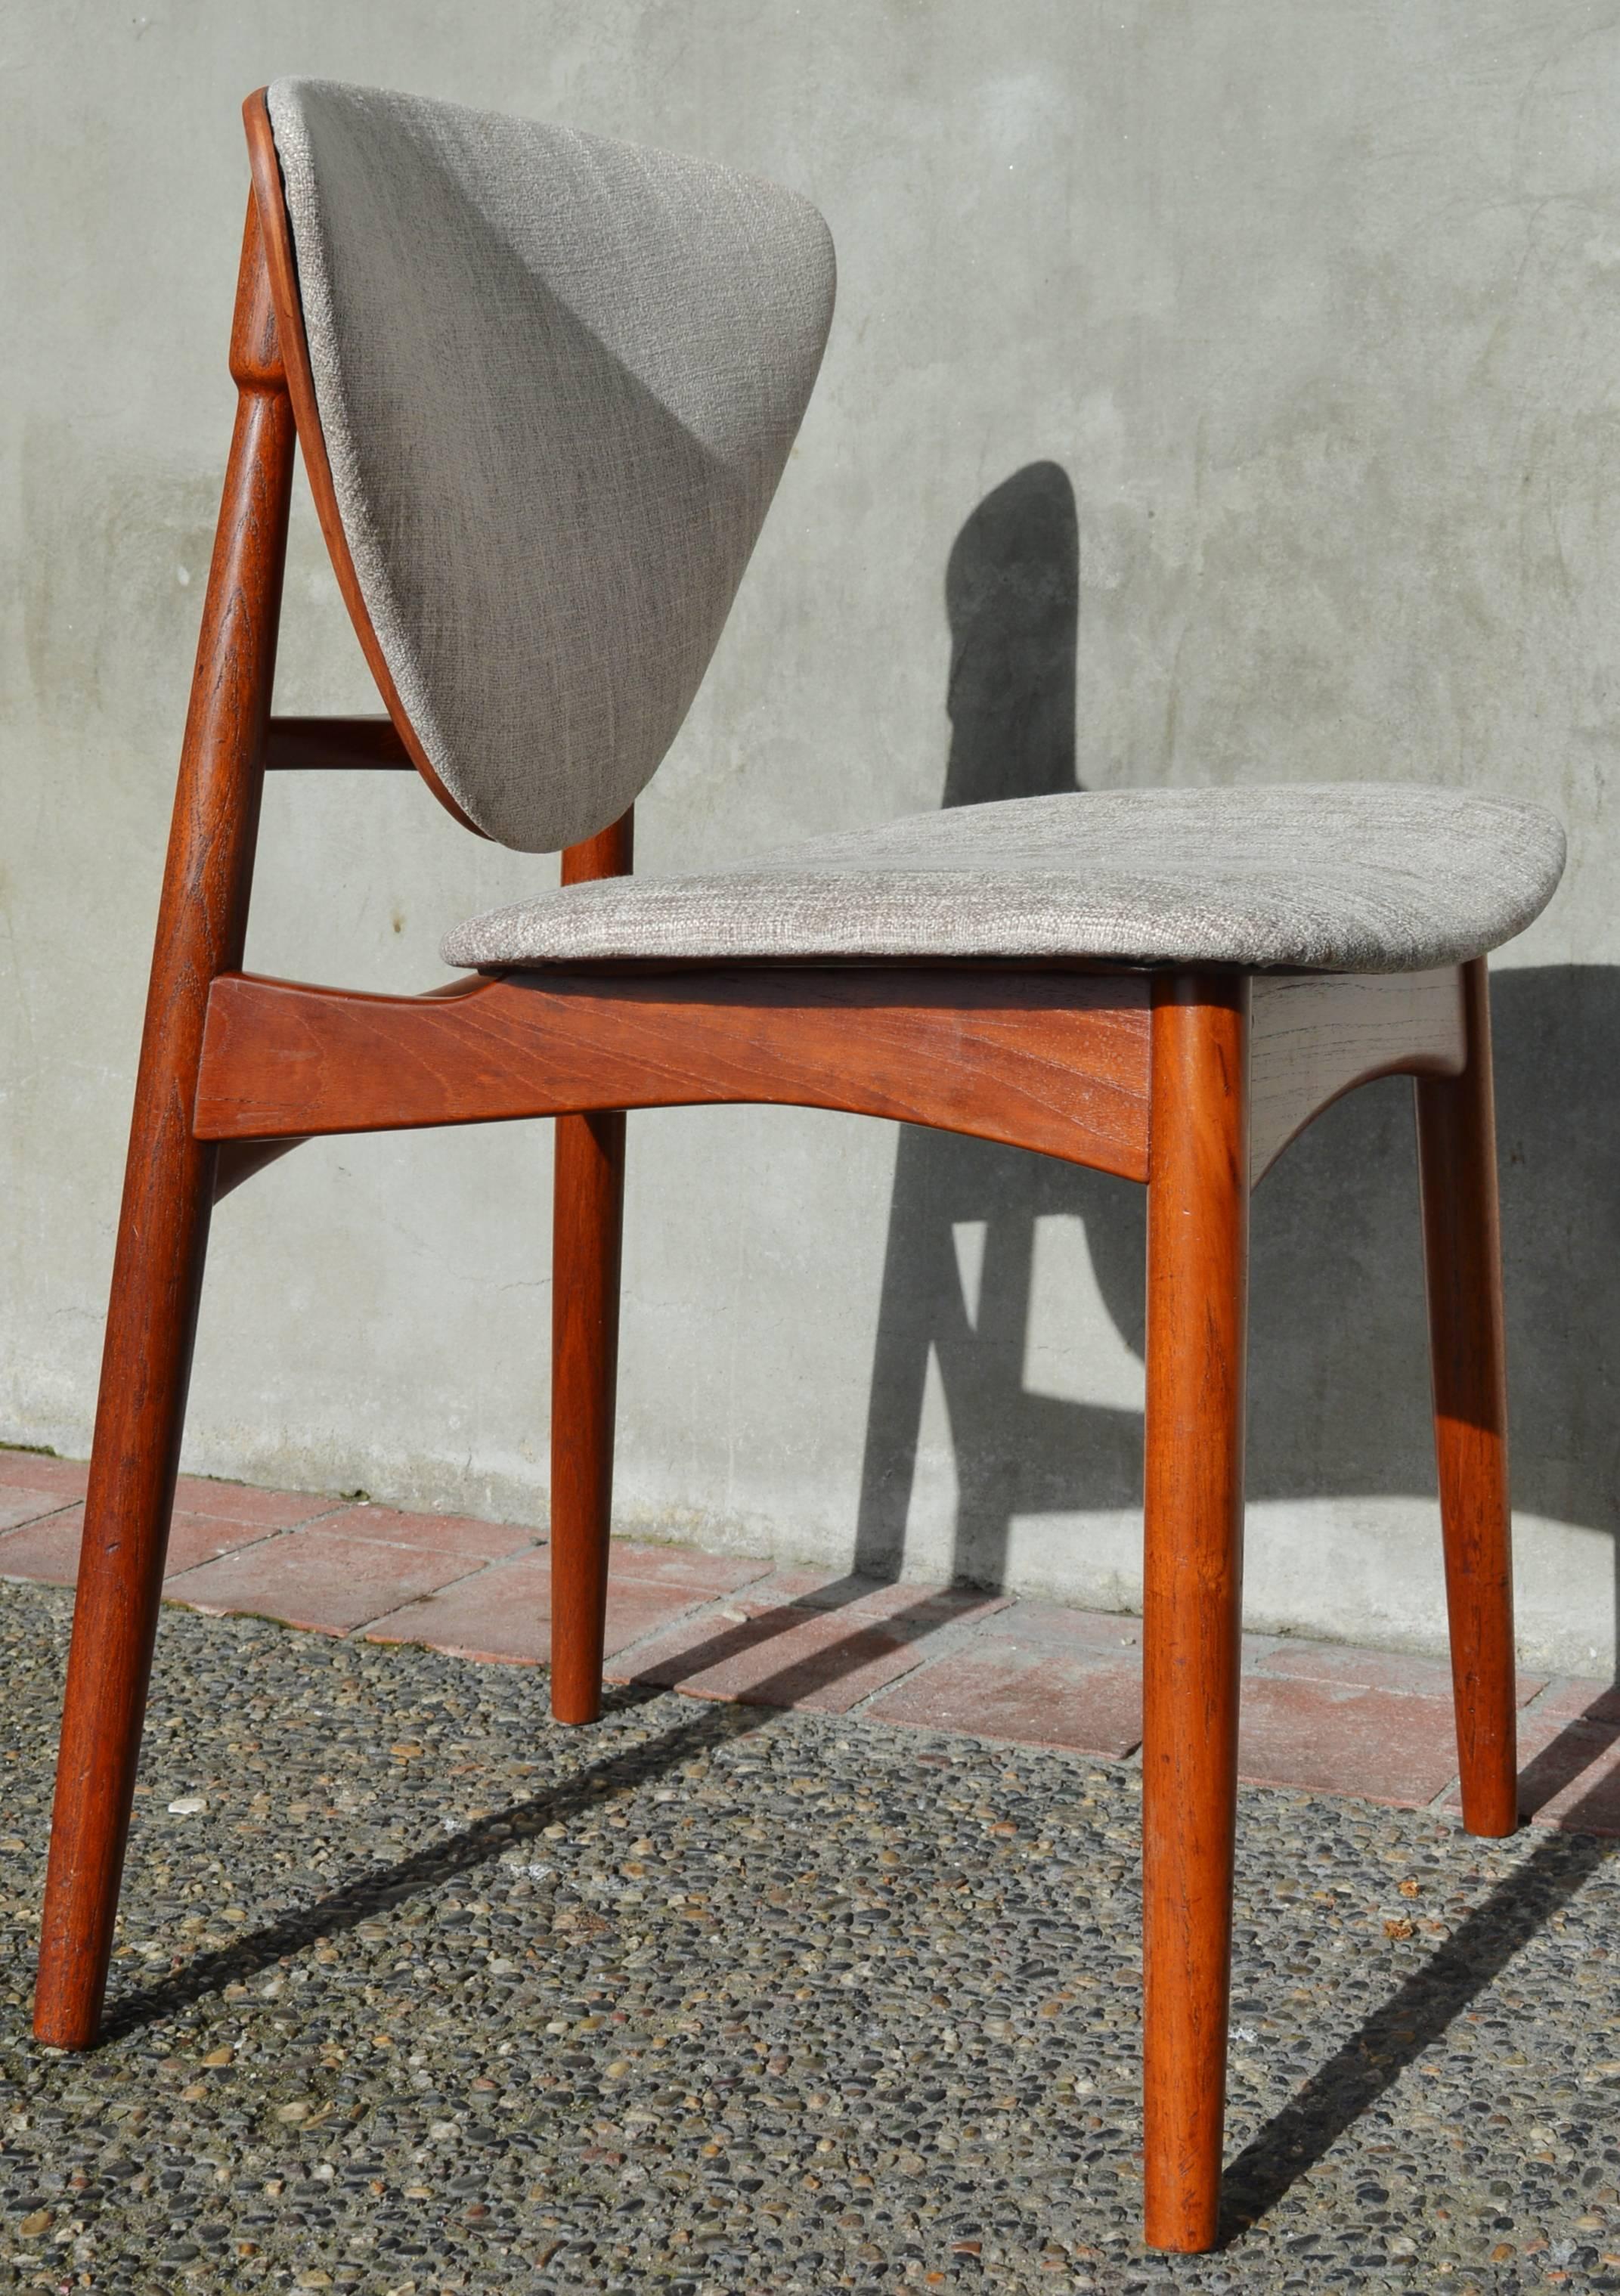 This totally hot Danish modern teak side or desk chair is just stunning and very much in the style of Arne Hovmand-Olsen! Note the triangulated backrest with upholstered front for ultimate comfort and wood back with splayed legs that are contoured